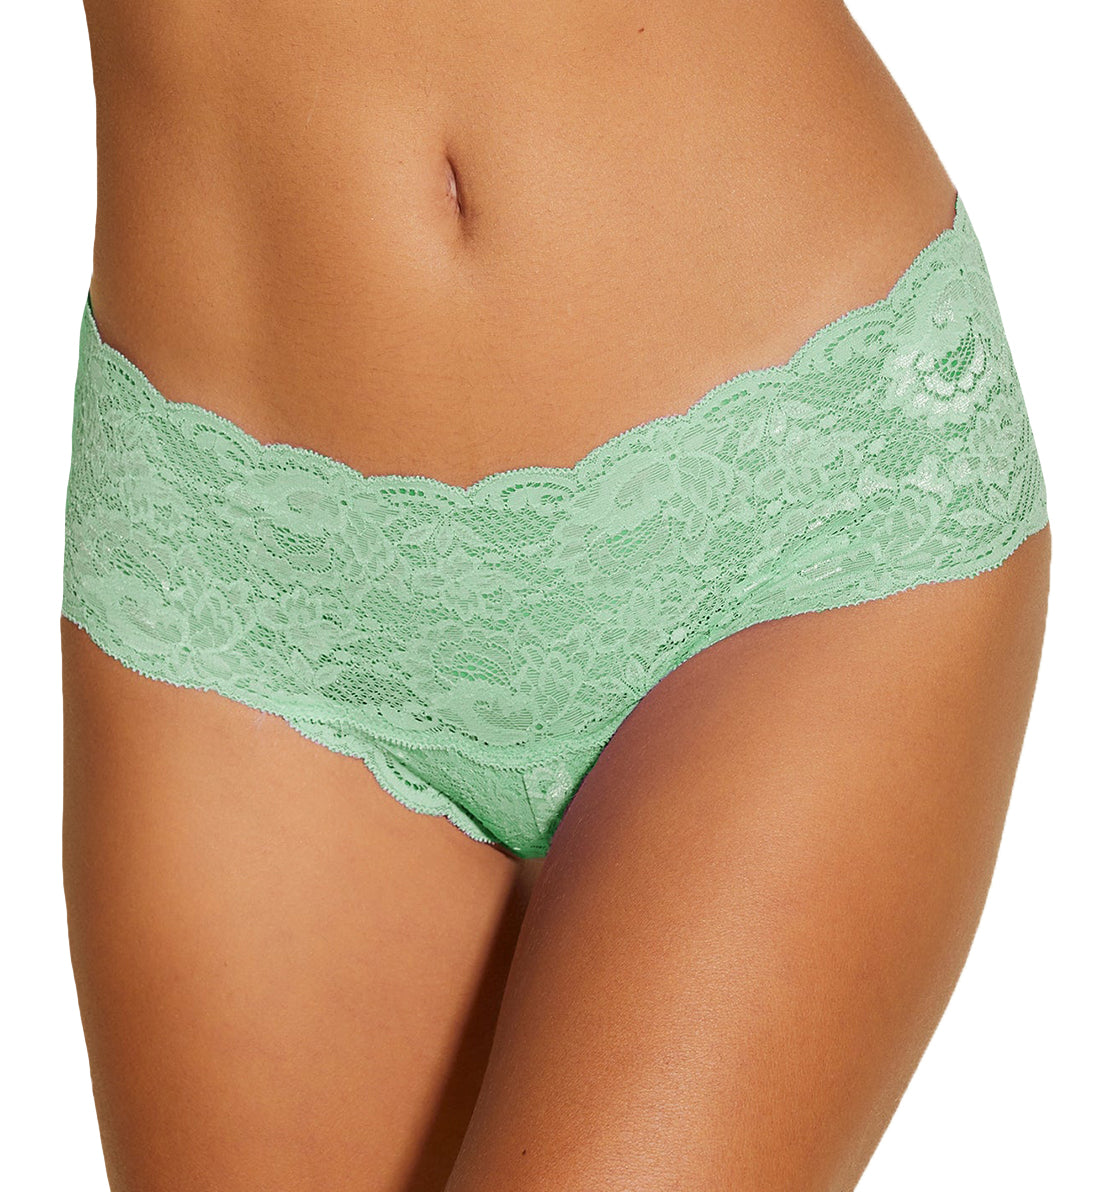 Cosabella Never Say Never Hottie Lowrider Hotpant (NEVER07ZL),S/M,Ghana Green - Ghana Green,S/M